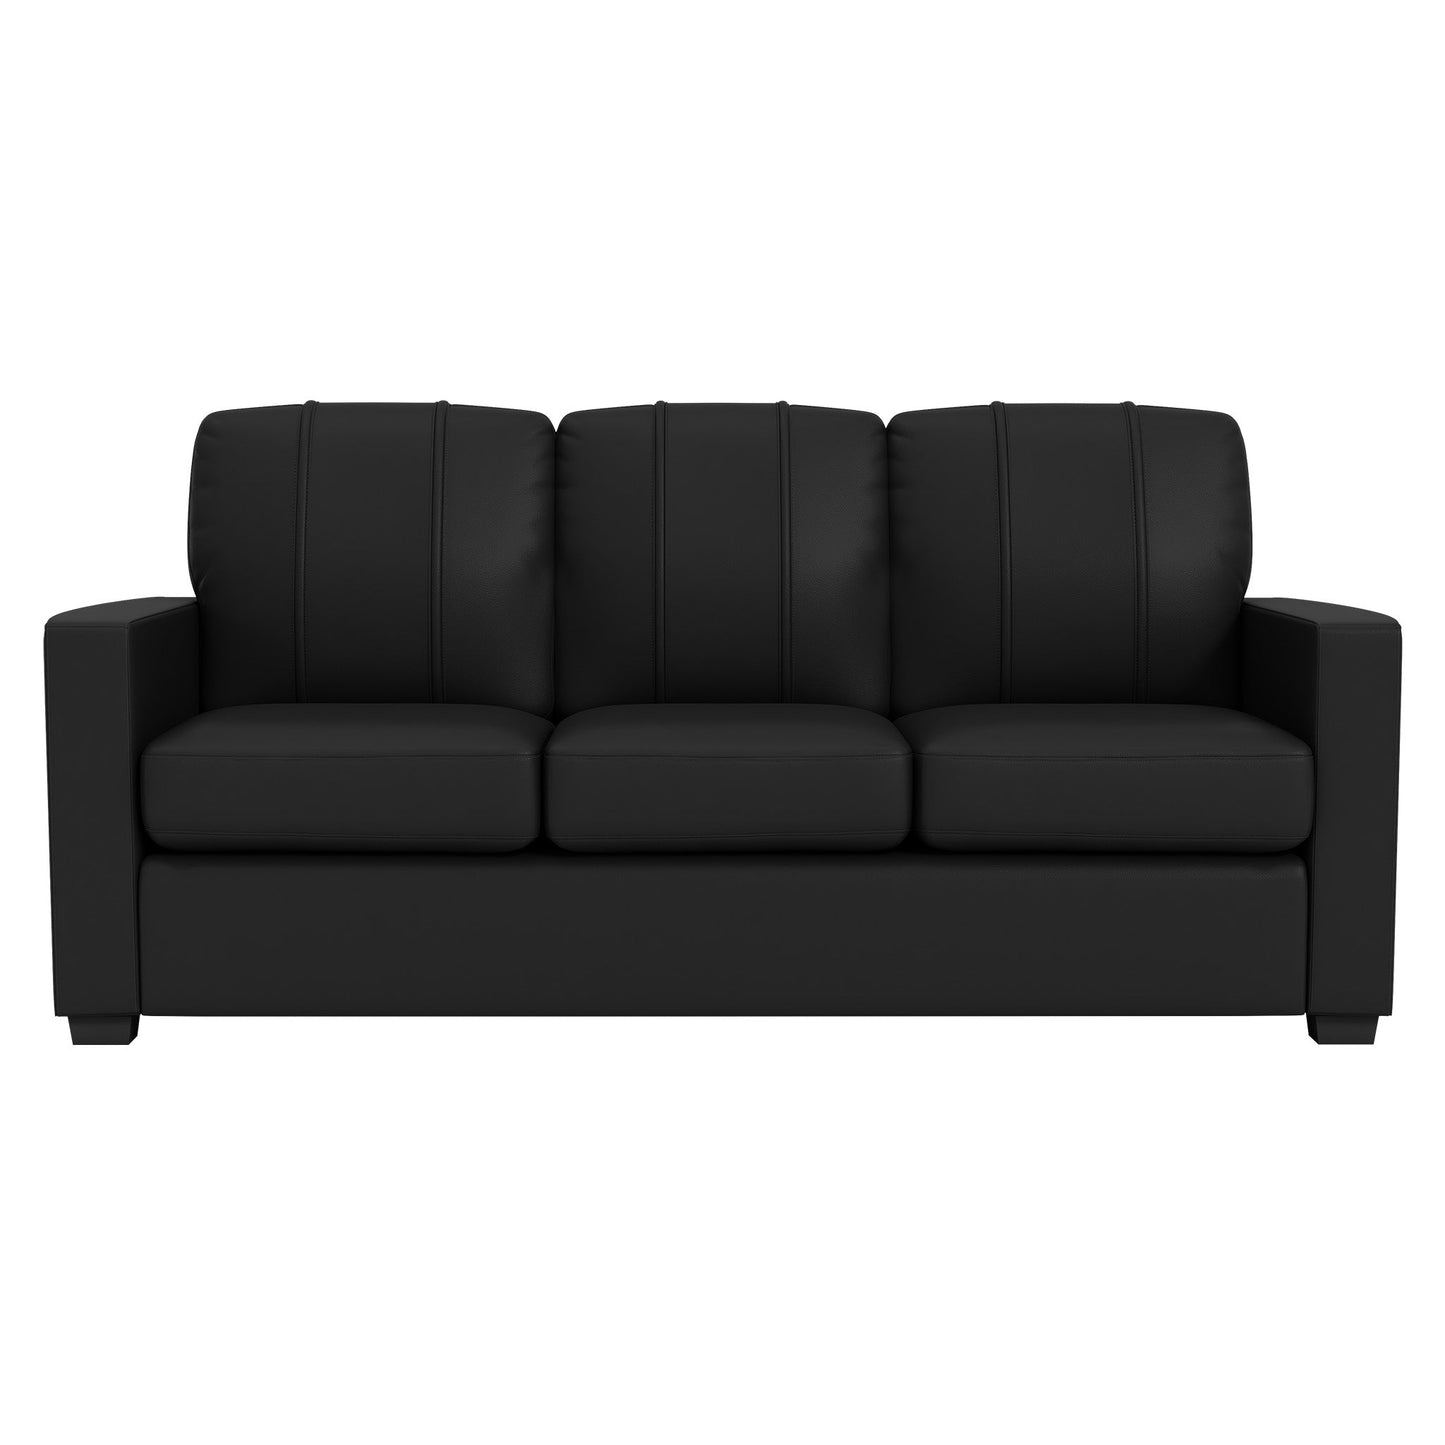 Silver Sofa with Oakland Athletics Secondary